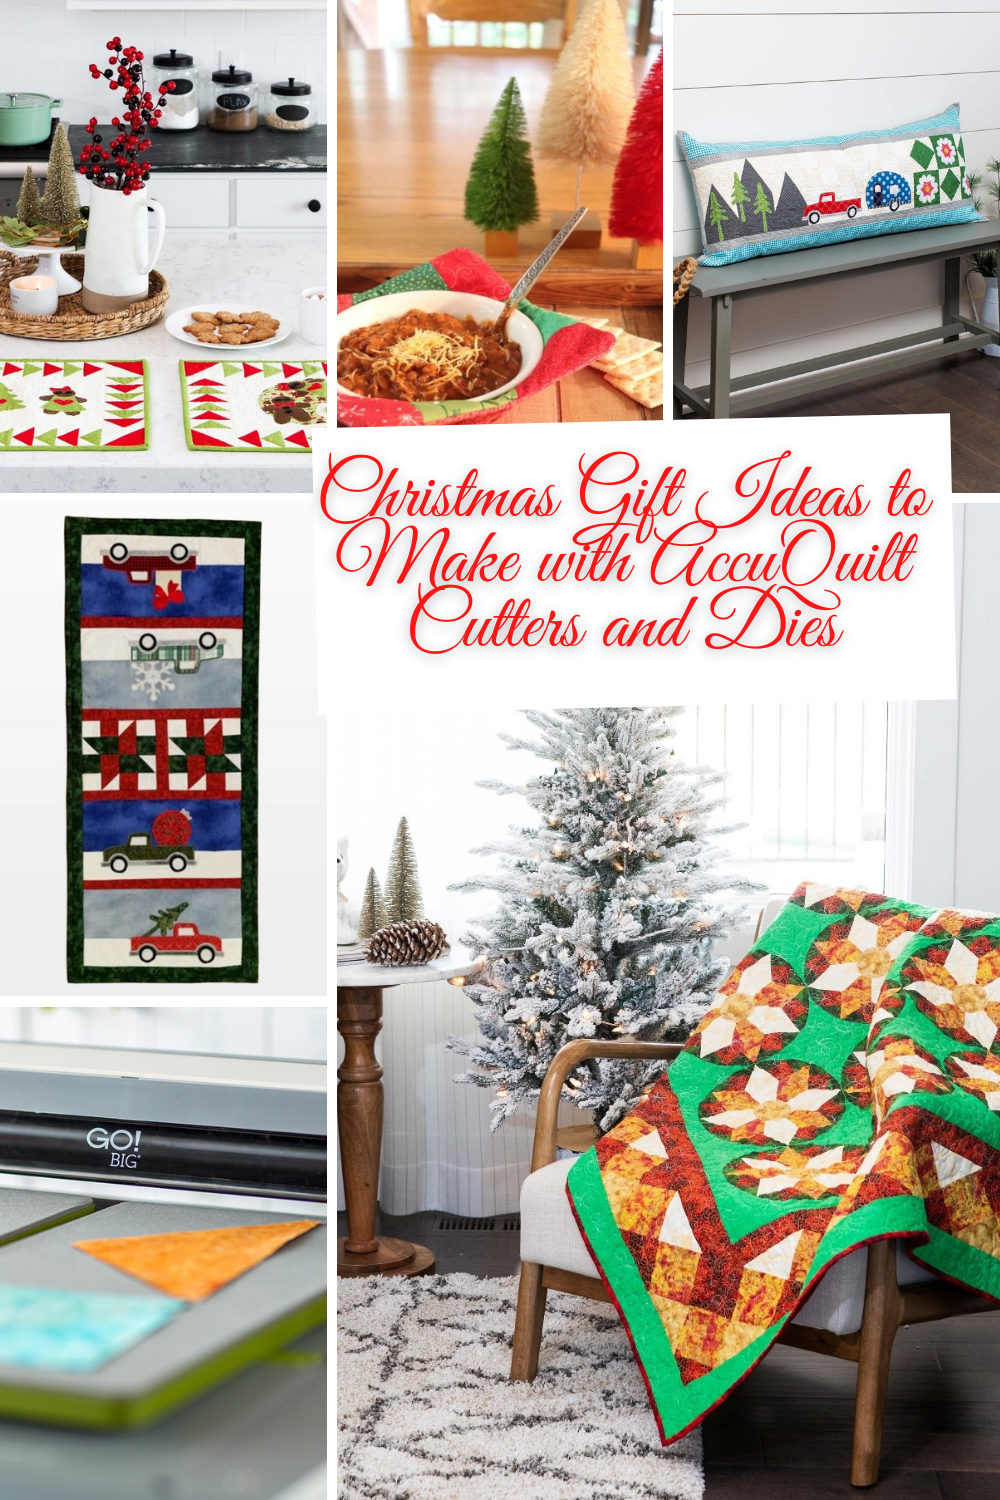 Christmas Gift Ideas for the AccuQuilt Cutter